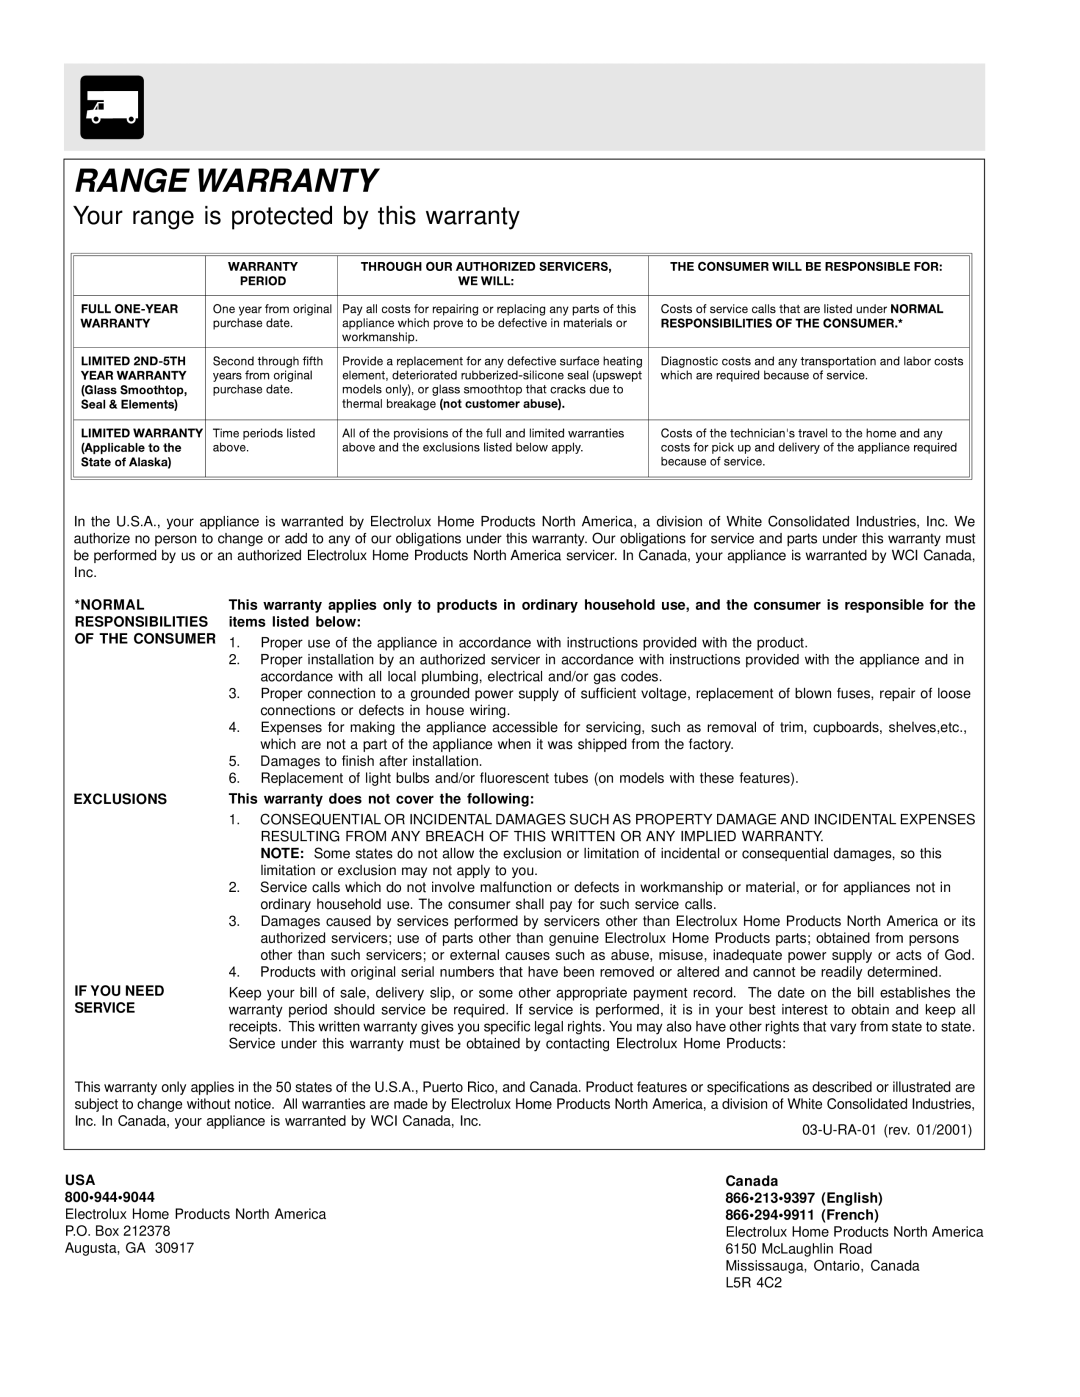 Frigidaire ES400 manual Range Warranty, Your range is protected by this warranty, Service 